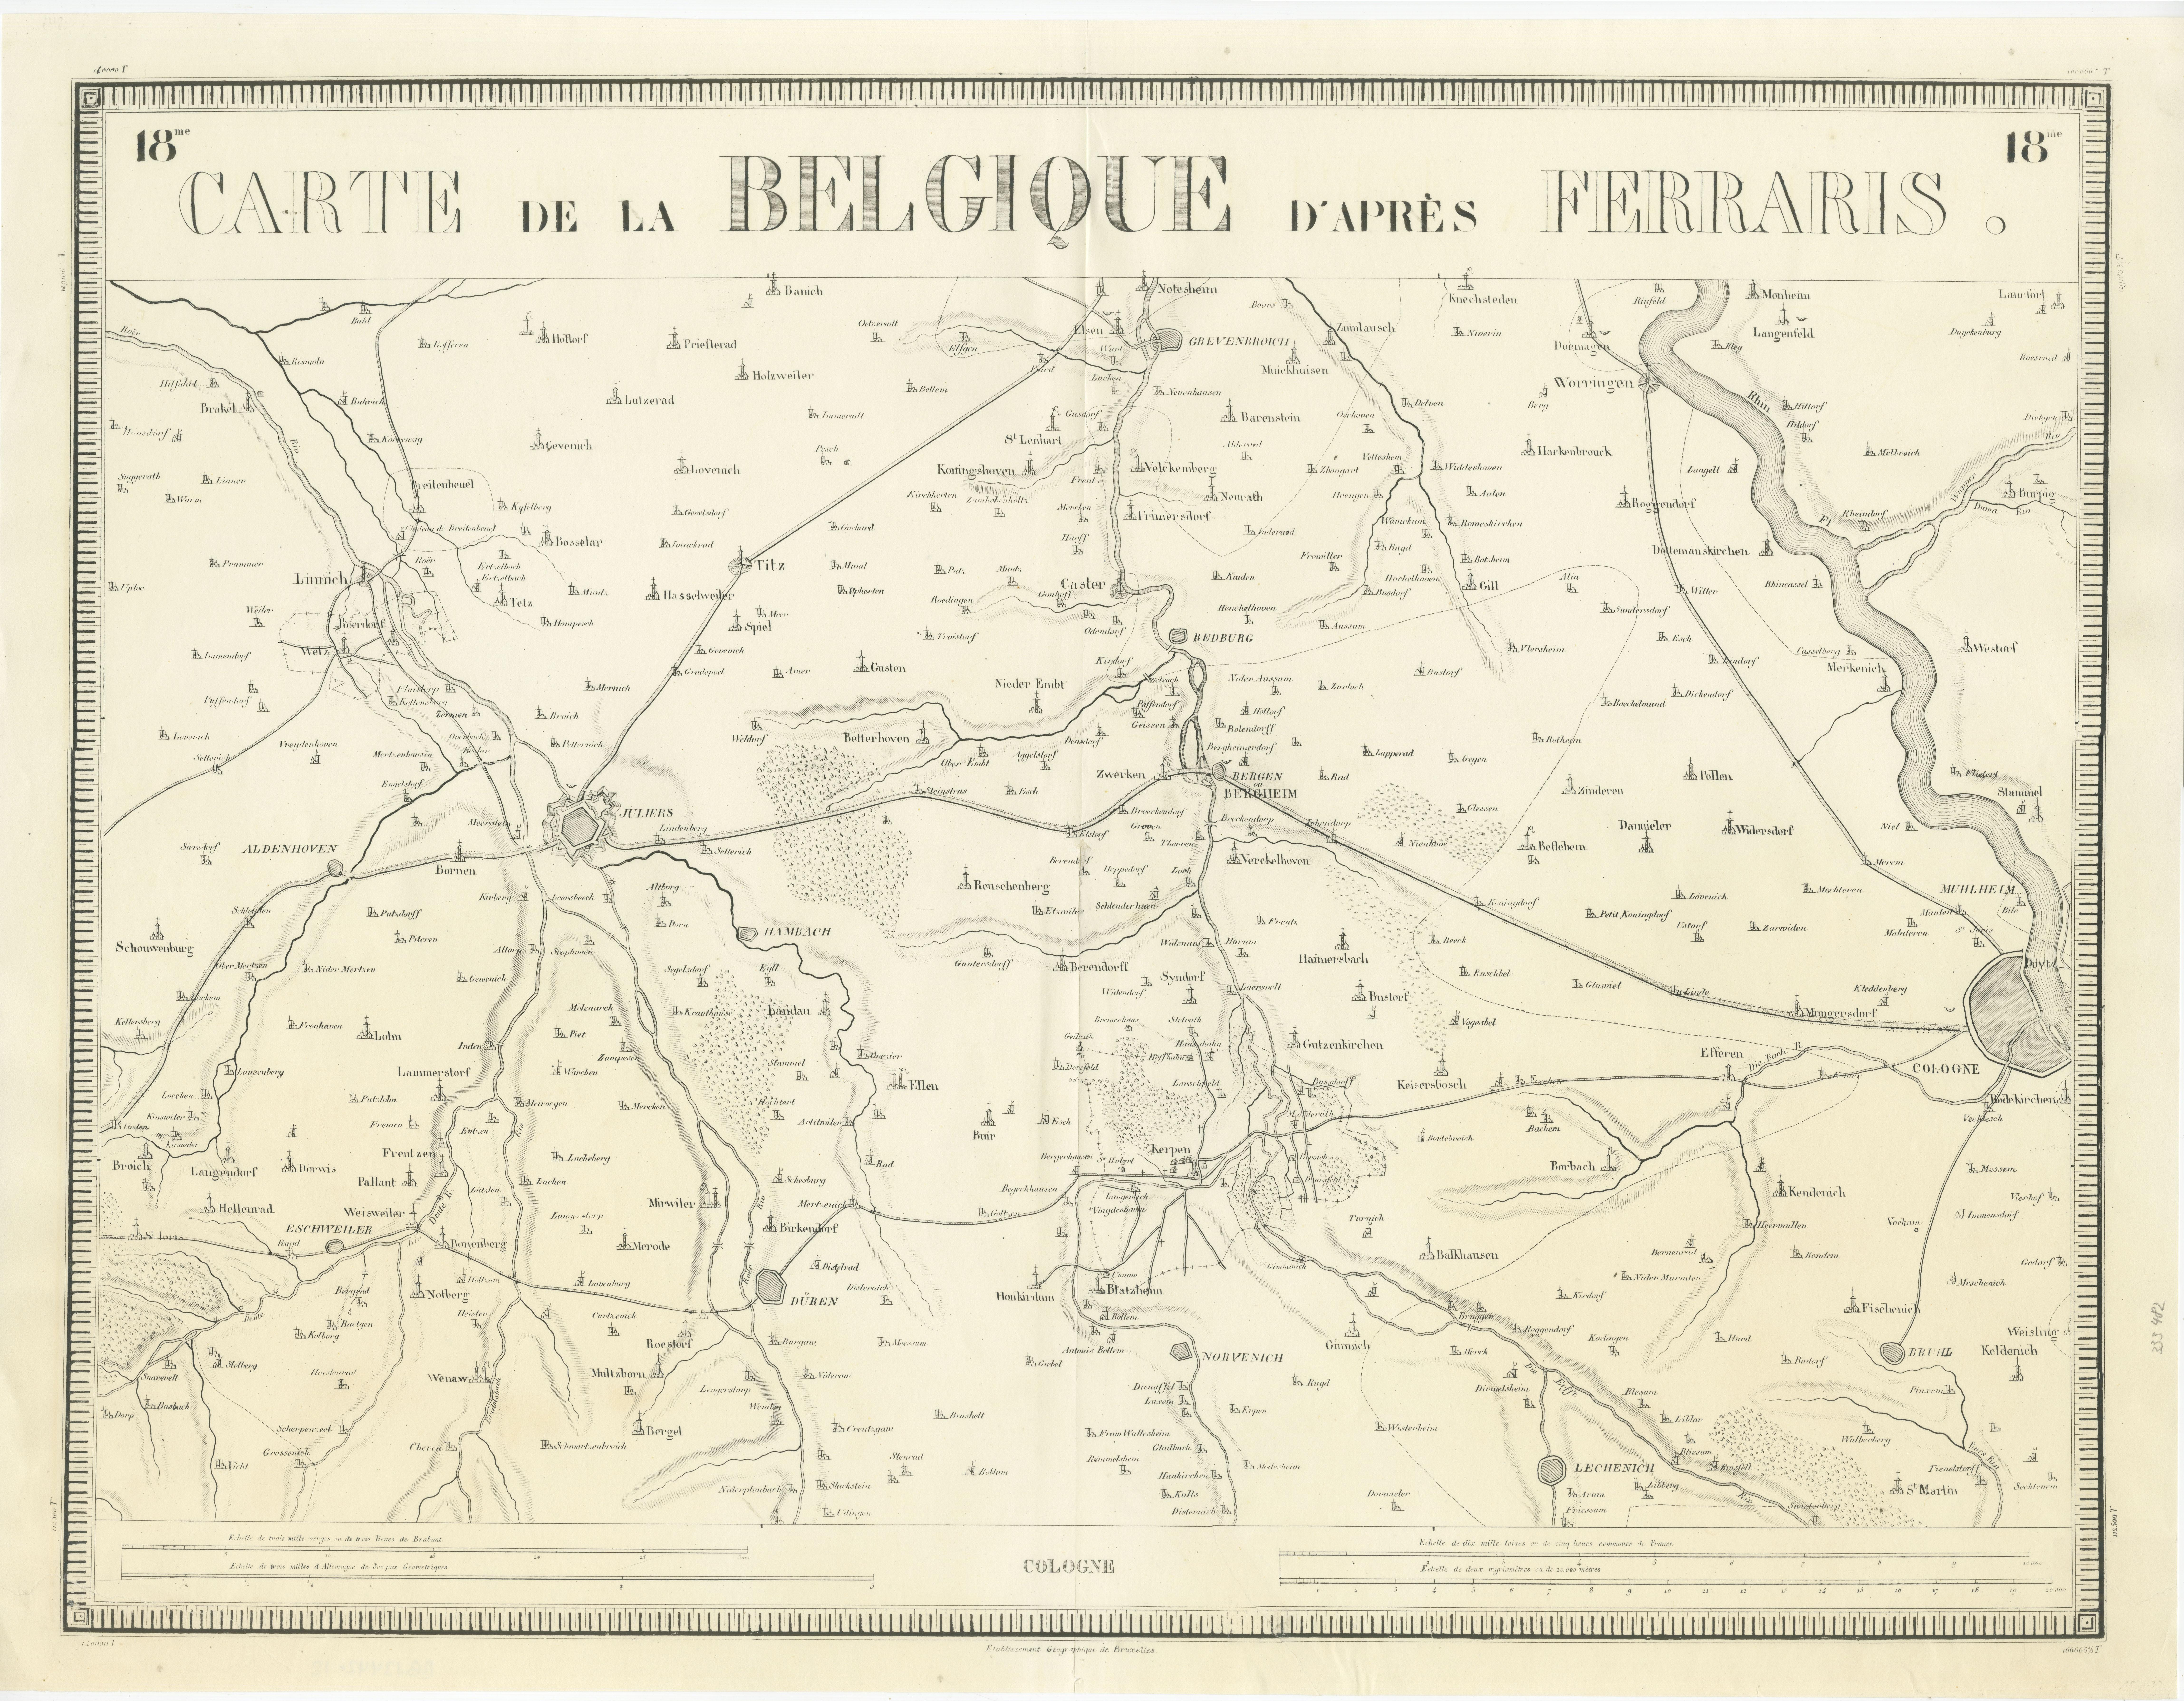 Antique map titled 'Carte de la Belgique d'après Ferraris'. Original antique map of the region near Cologne, Germany. Cologne is the largest city of the German western state of North Rhine-Westphalia. This map originates from a series of maps made